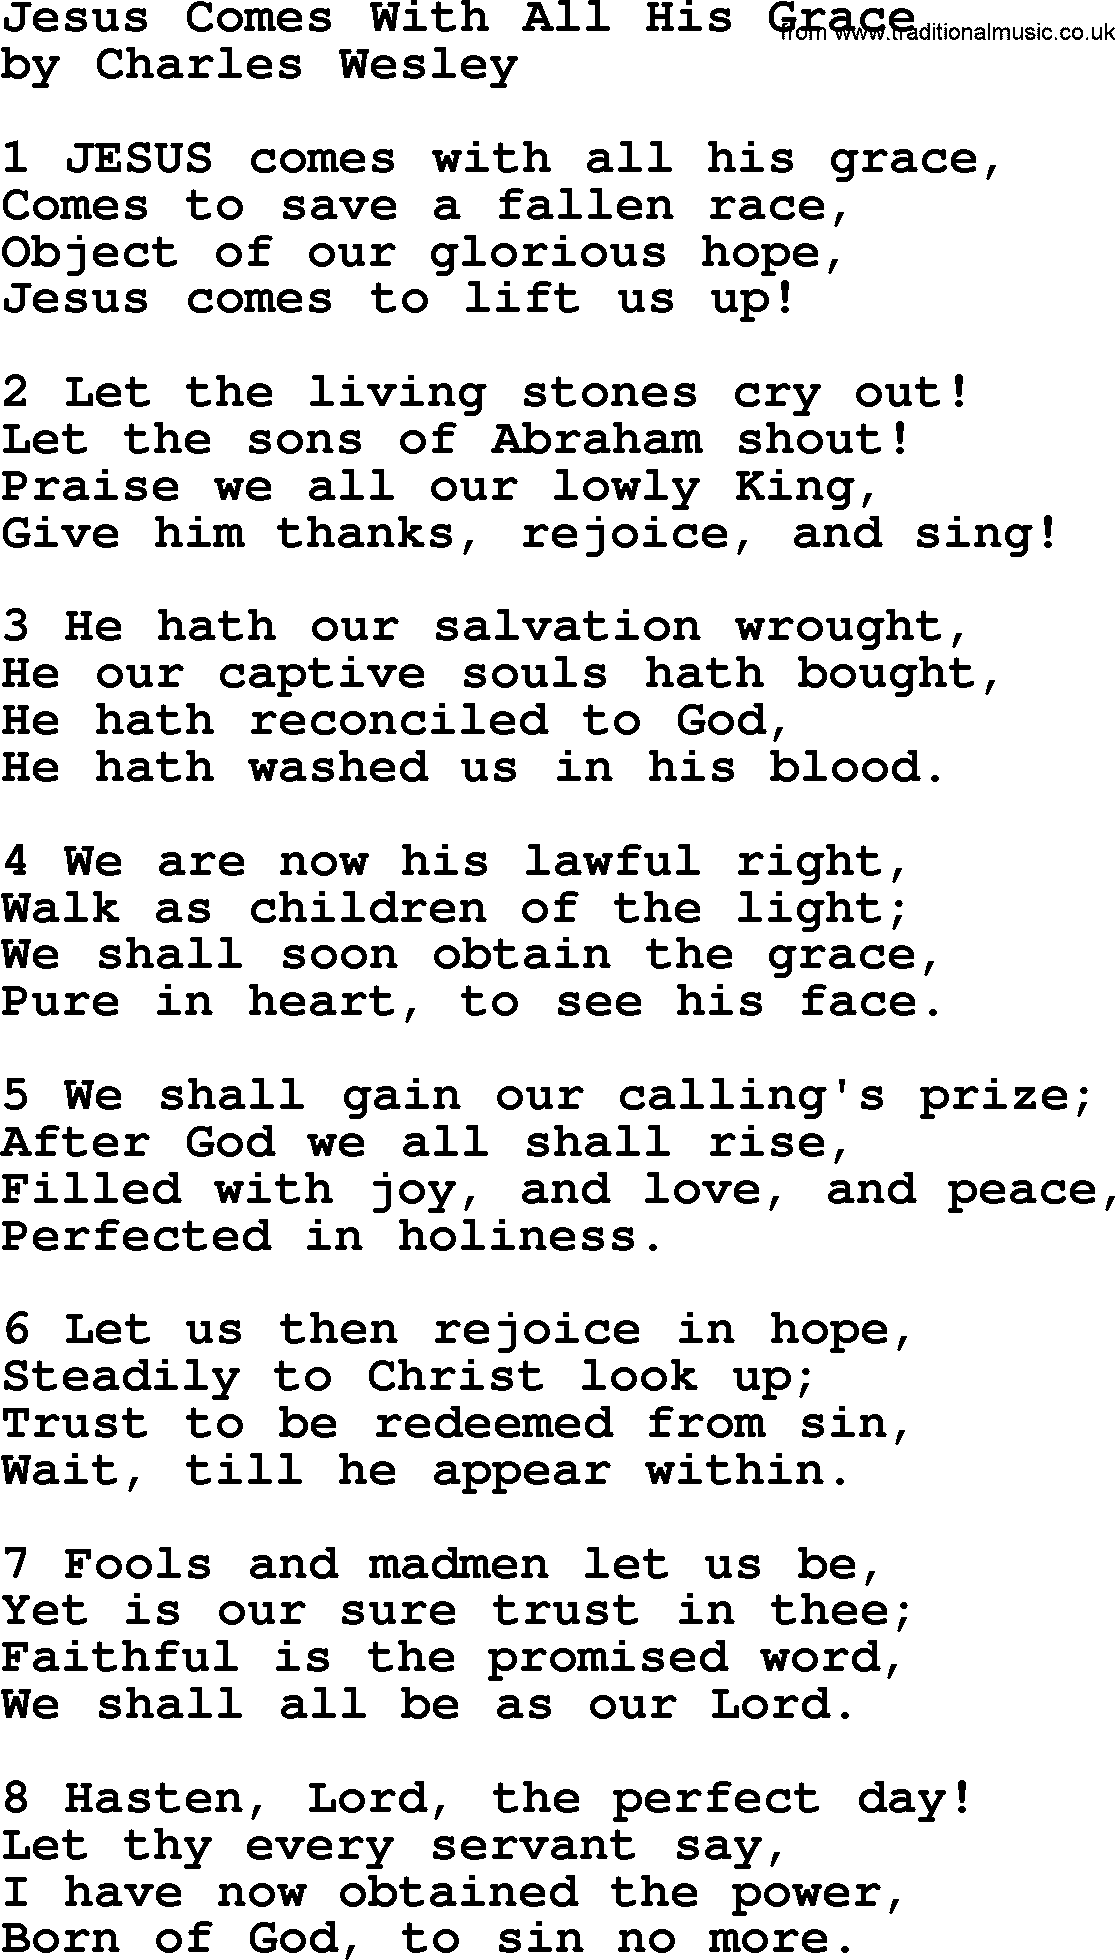 Charles Wesley hymn: Jesus Comes With All His Grace, lyrics